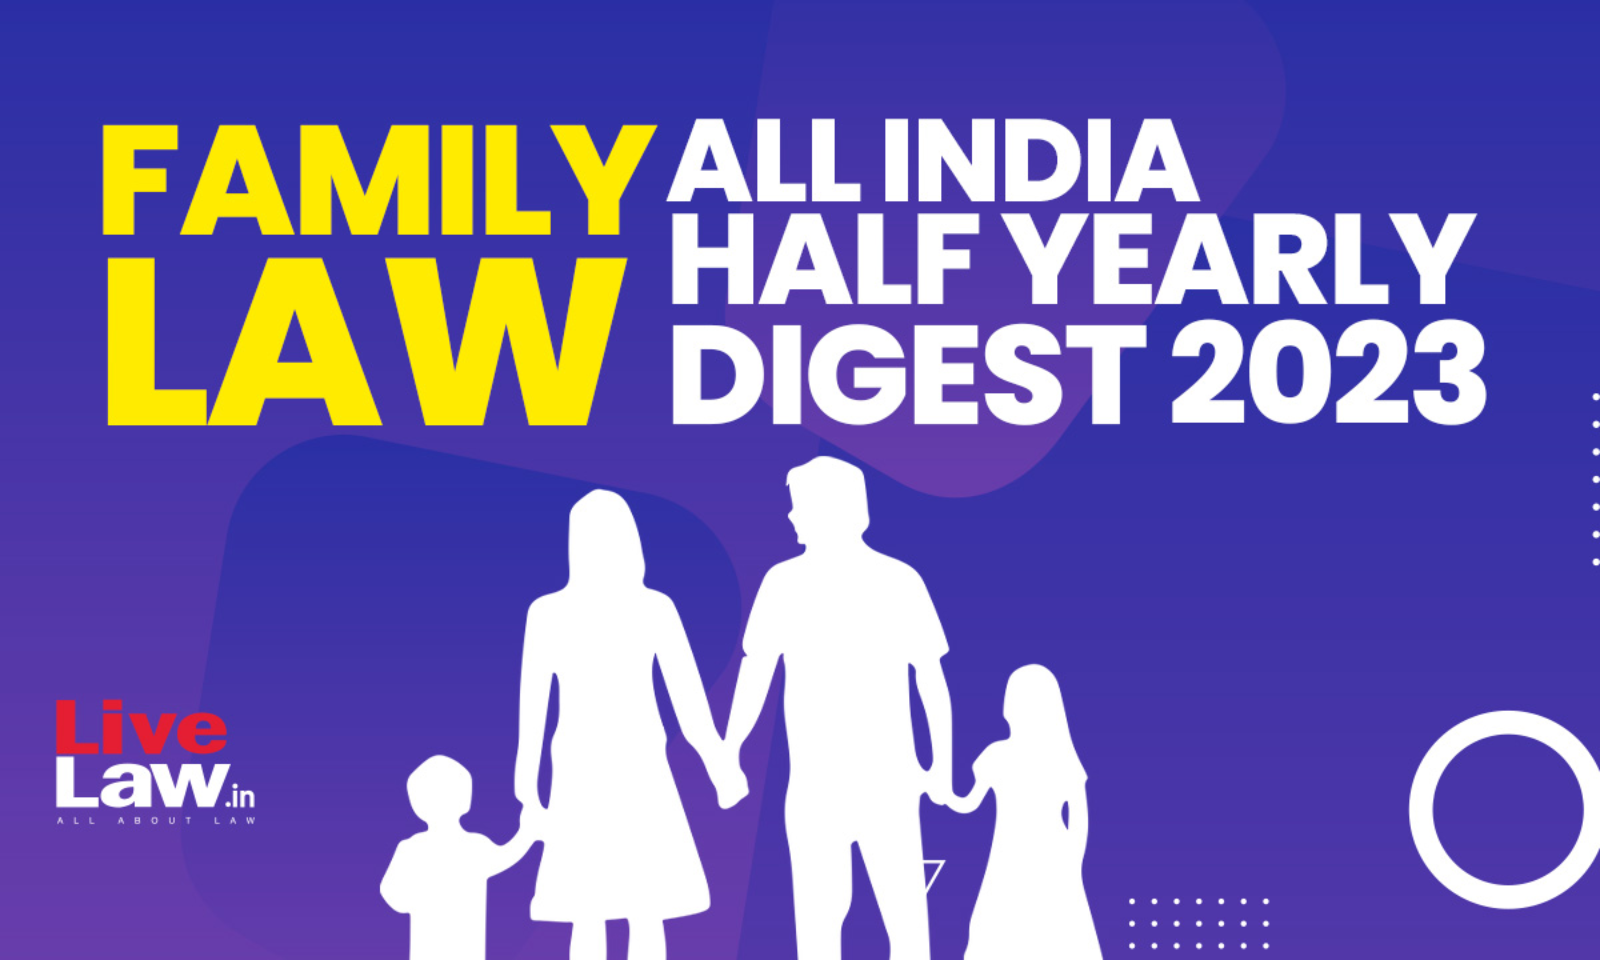 1600px x 960px - Family Law: All India Half Yearly Digest 2023